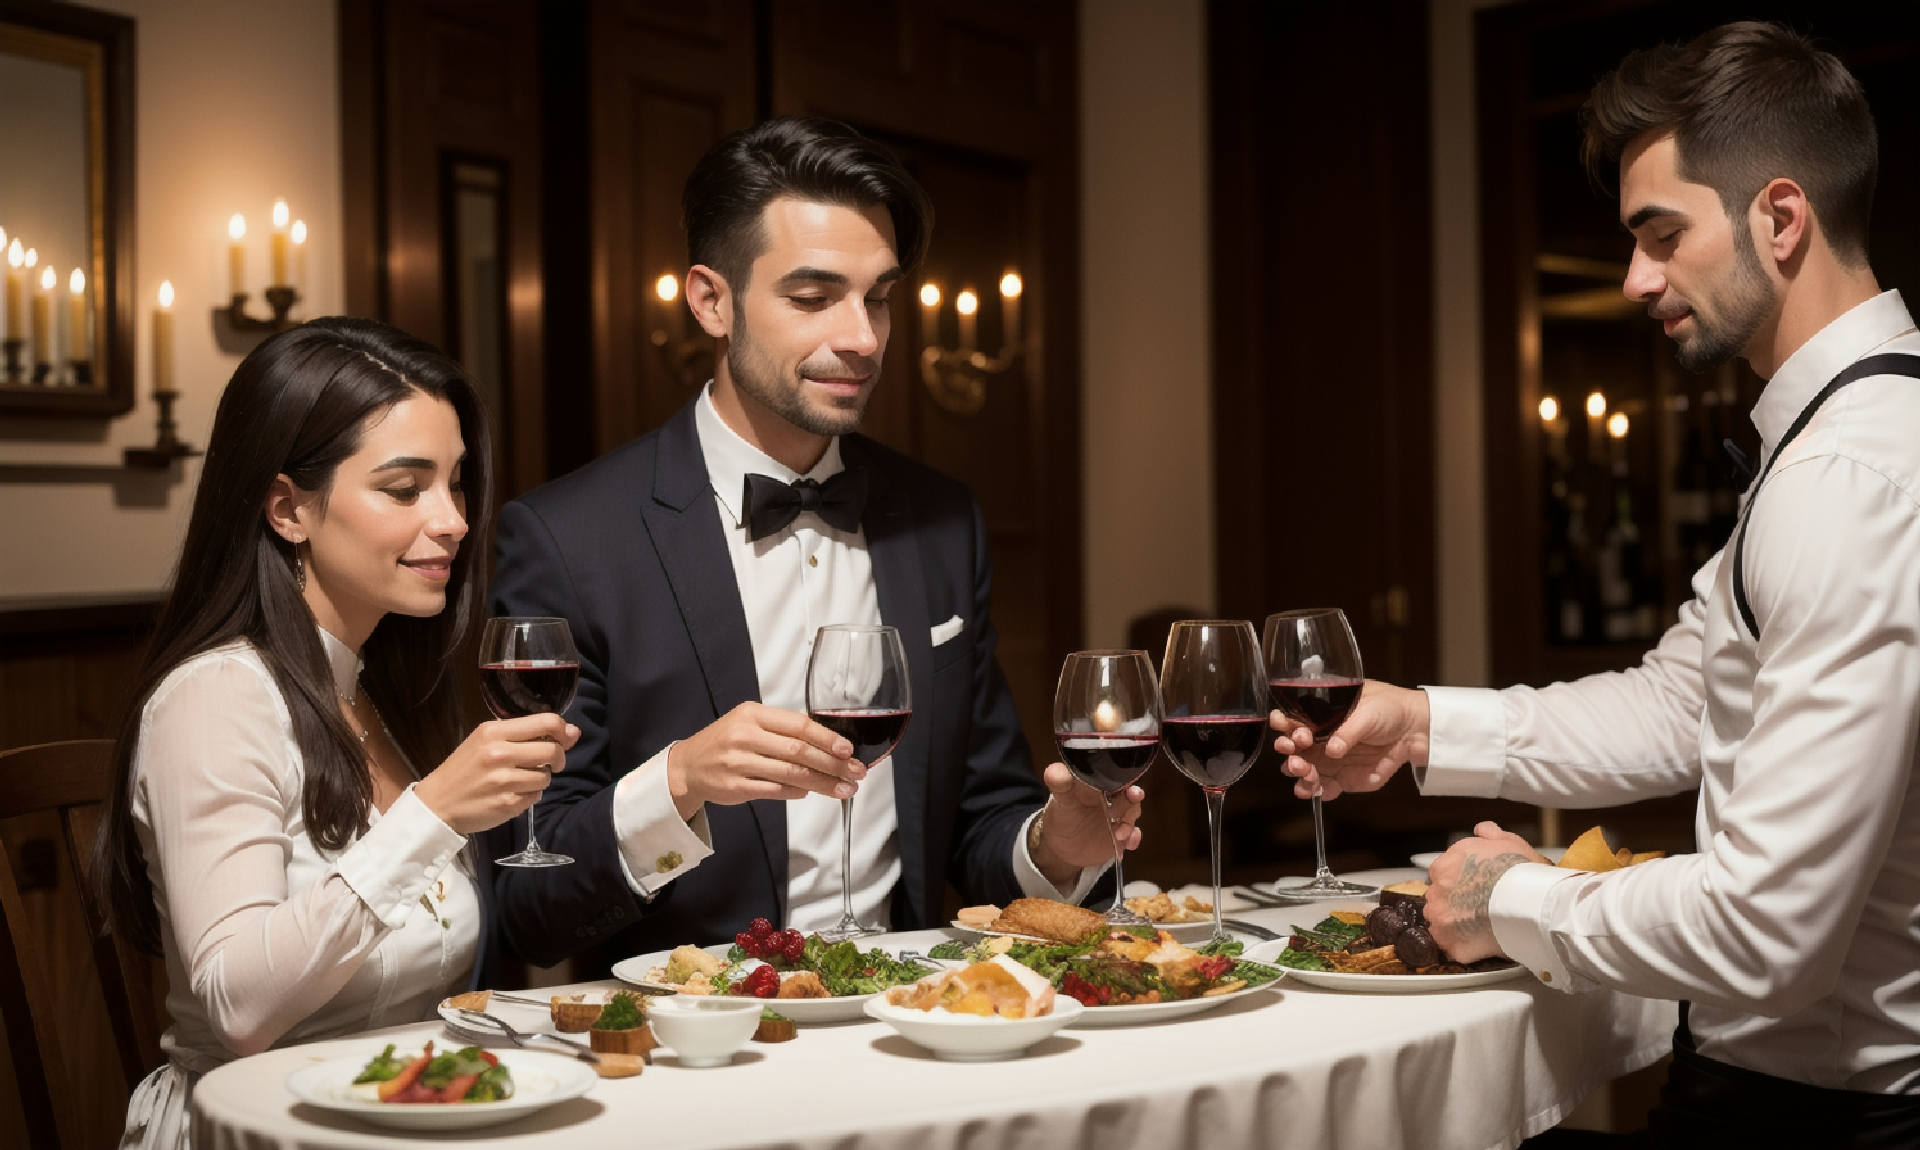 A cozy and inviting dining table setting with guests observing a waiter performing the wine presentation ritual, emphasizing the anticipation and appreciation in the atmosphere.